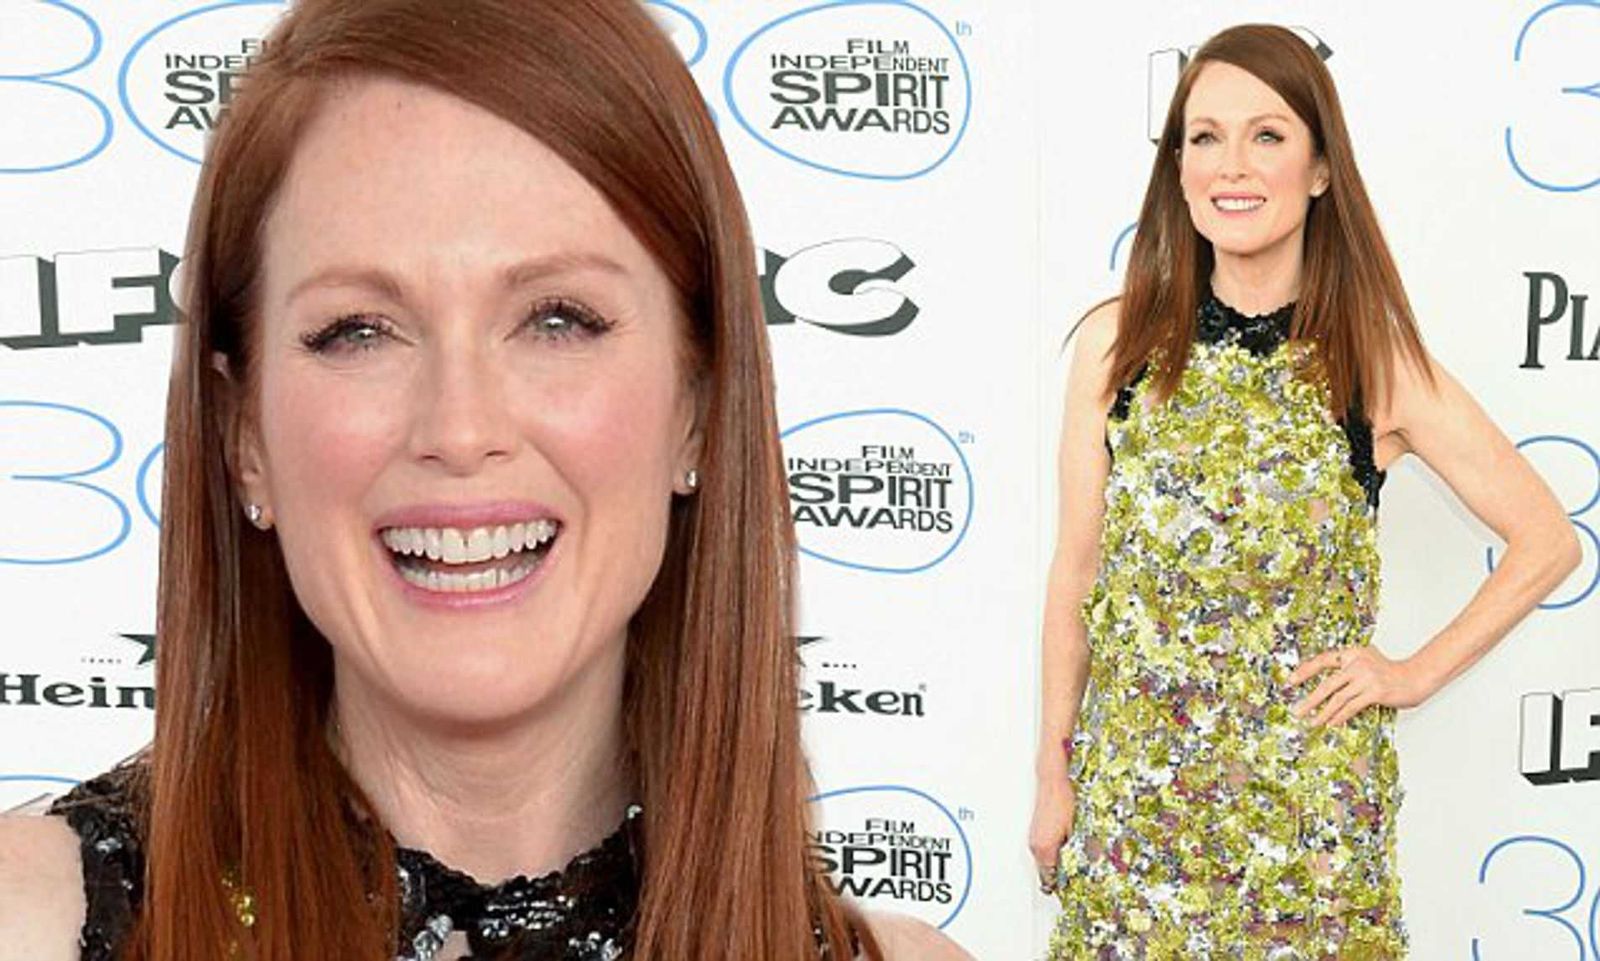 Julianne Moore (Source: Daily Mail)